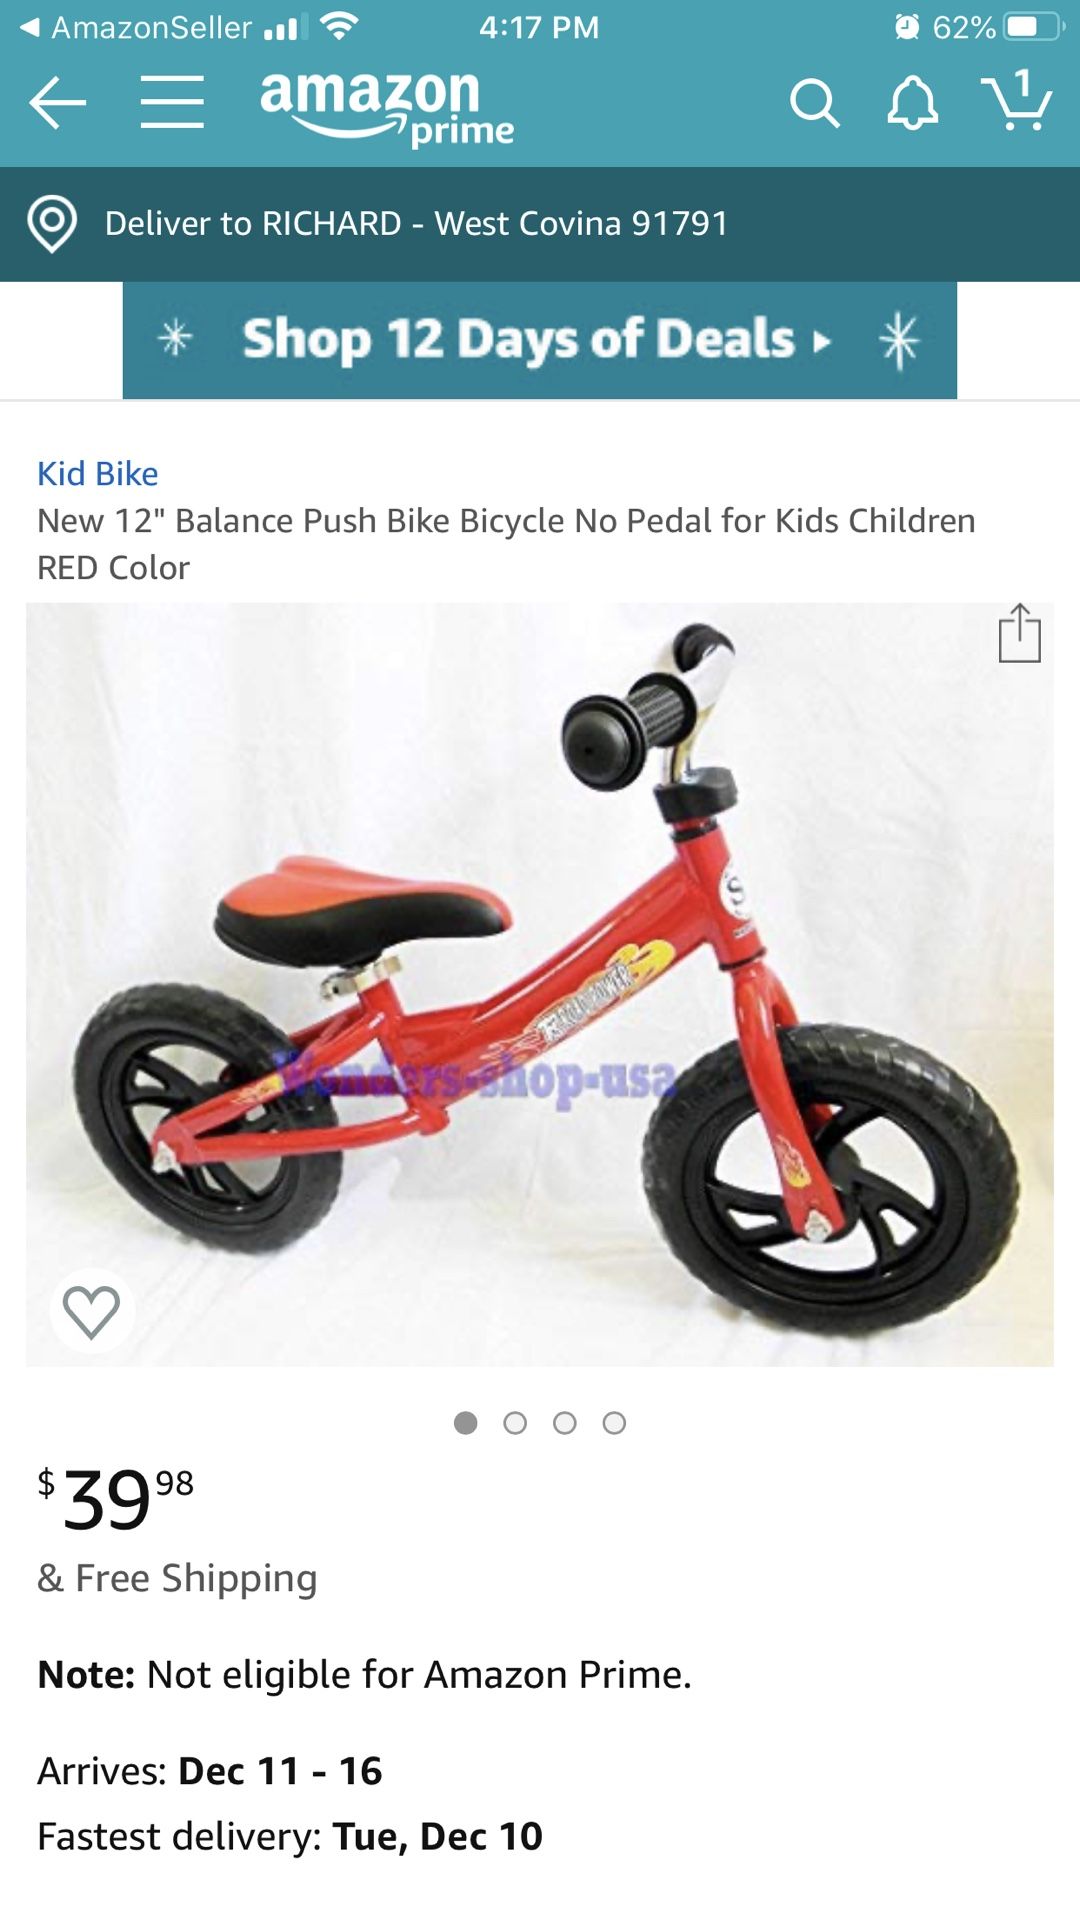 New Learn How to Ride BALANCE BIKE for Kids RED